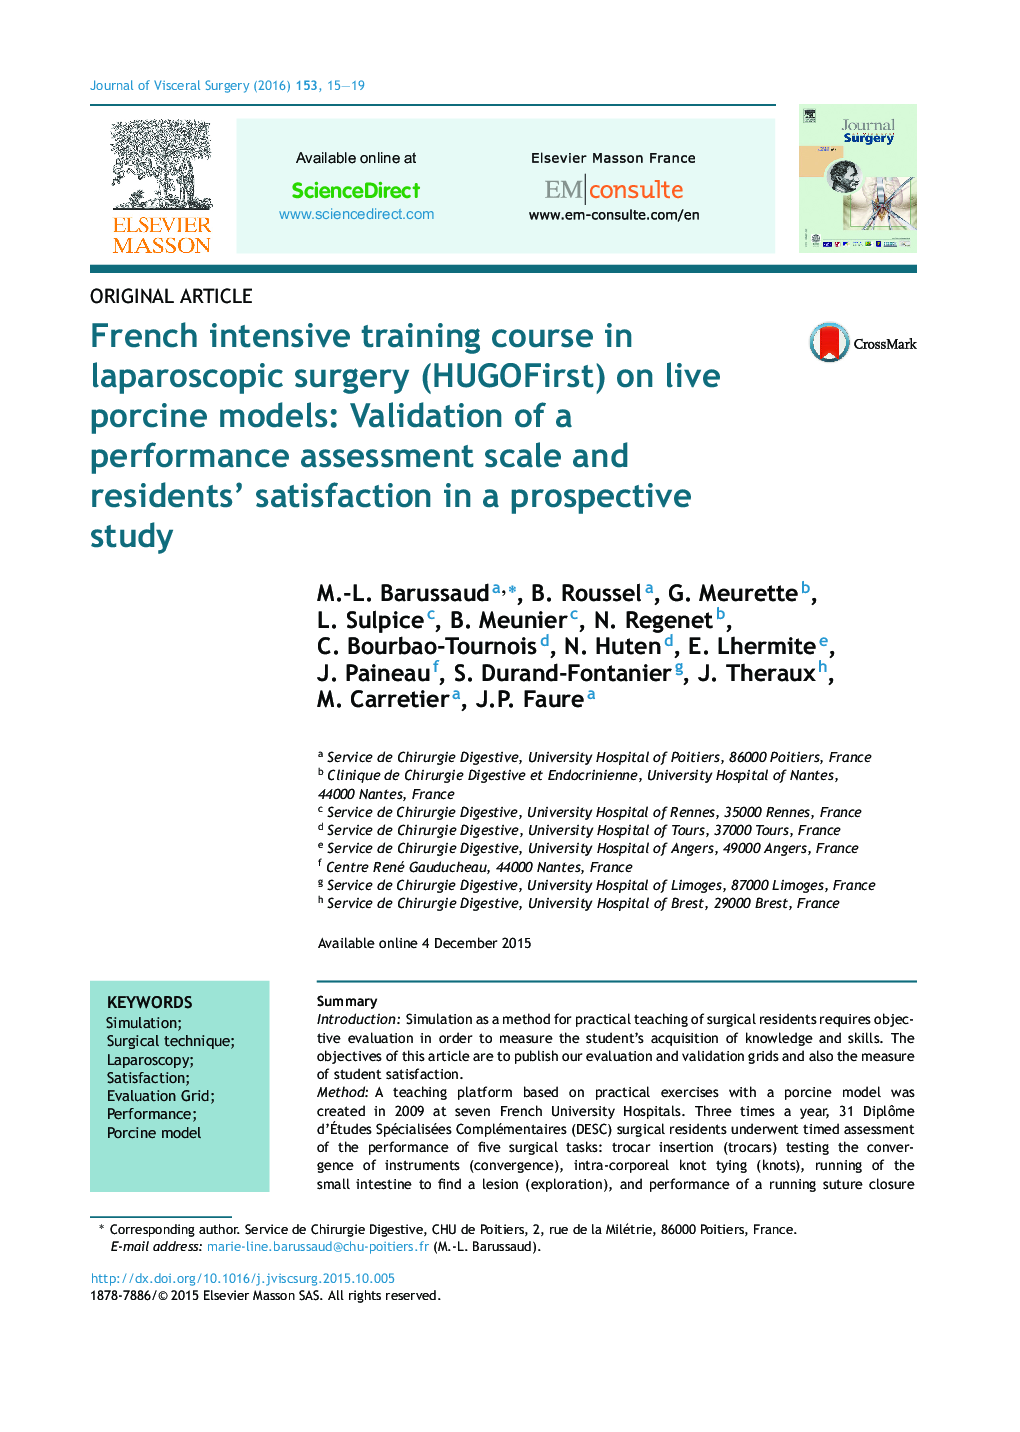 French intensive training course in laparoscopic surgery (HUGOFirst) on live porcine models: Validation of a performance assessment scale and residents’ satisfaction in a prospective study